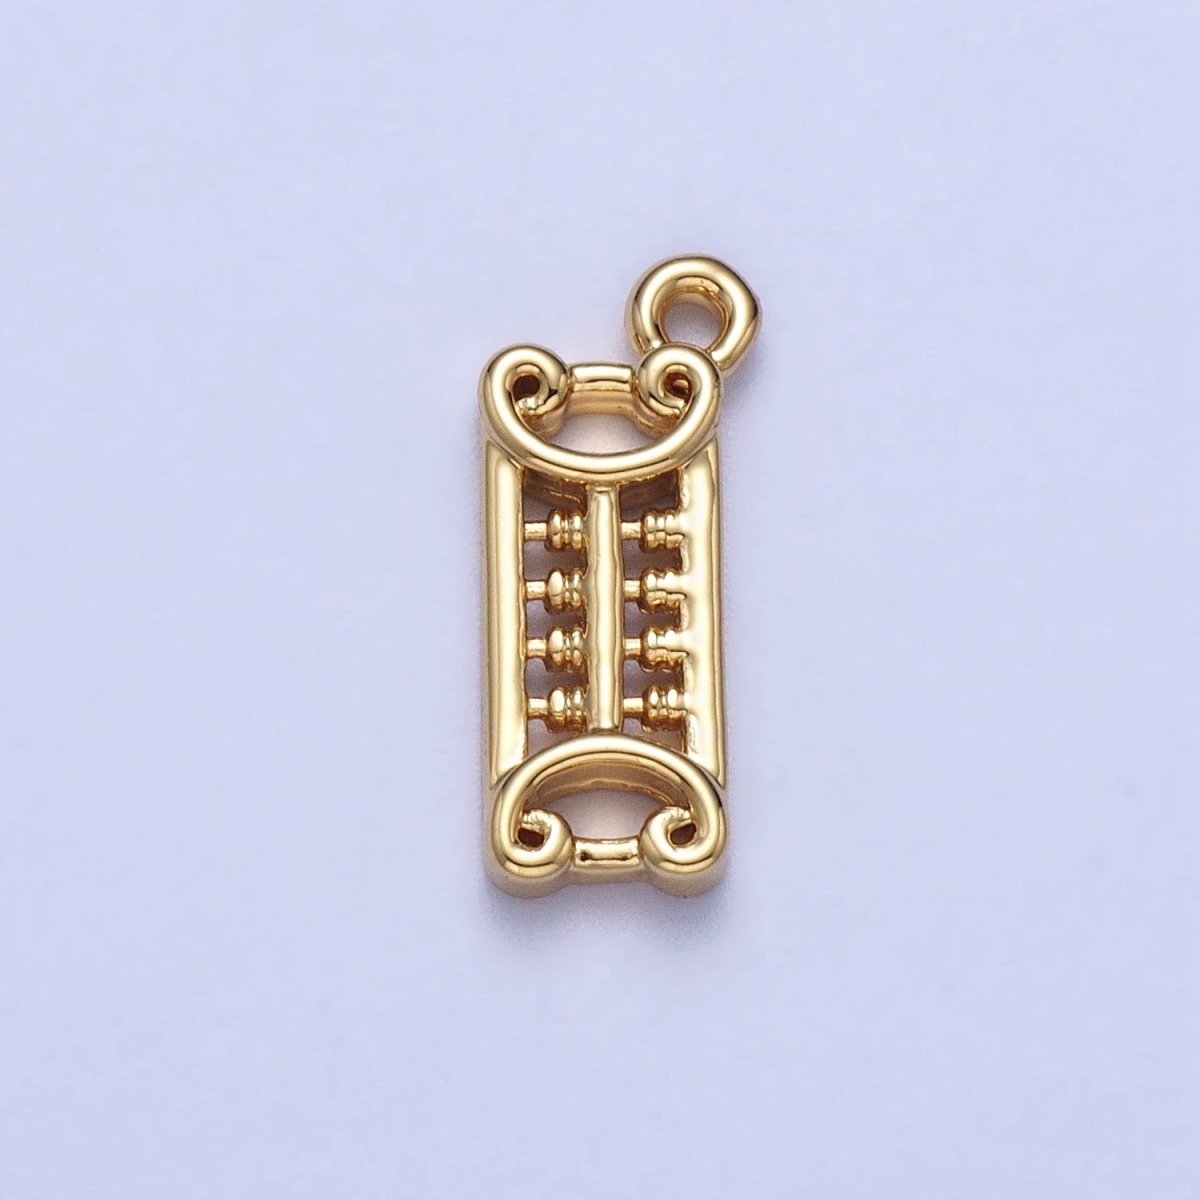 Asian Abacus Mathematics Tool Add-On Charm in Gold & Silver | AC038 AC039 - DLUXCA